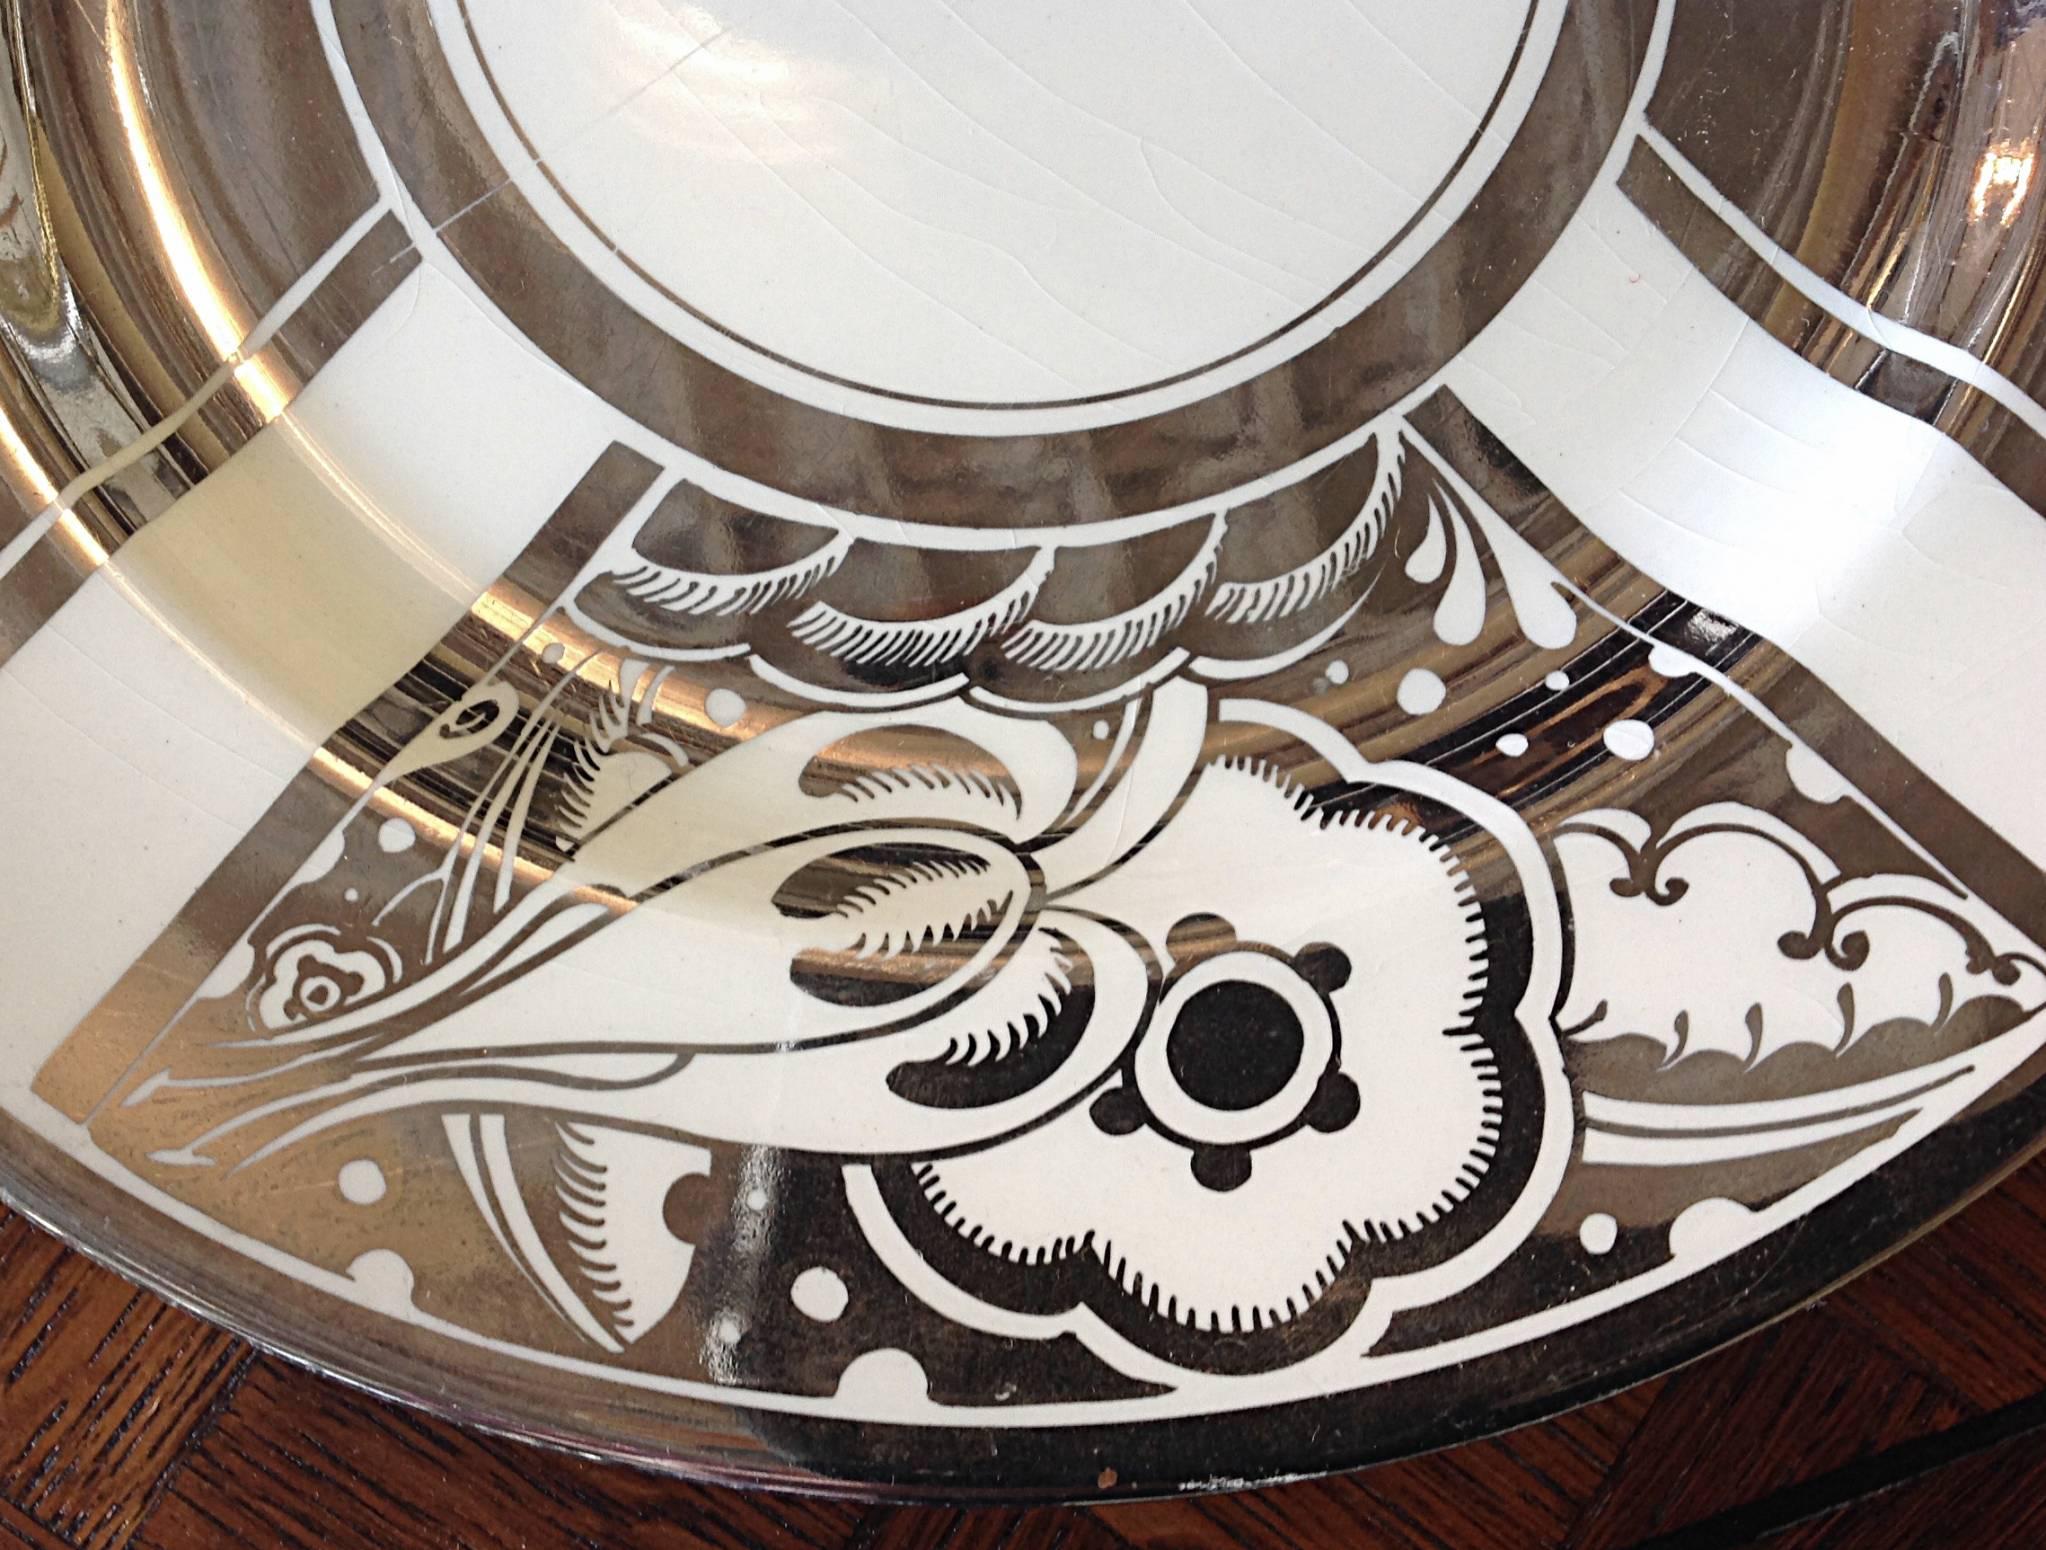 A wonderful set of Art Deco dinner plates. A Susie Cooper design from 1926 and produced in 1930. Platinum transfer ware. Very good condition with minor ware to platinum and crazing throughout. Artist signed and produced by Gray's Pottery of England.